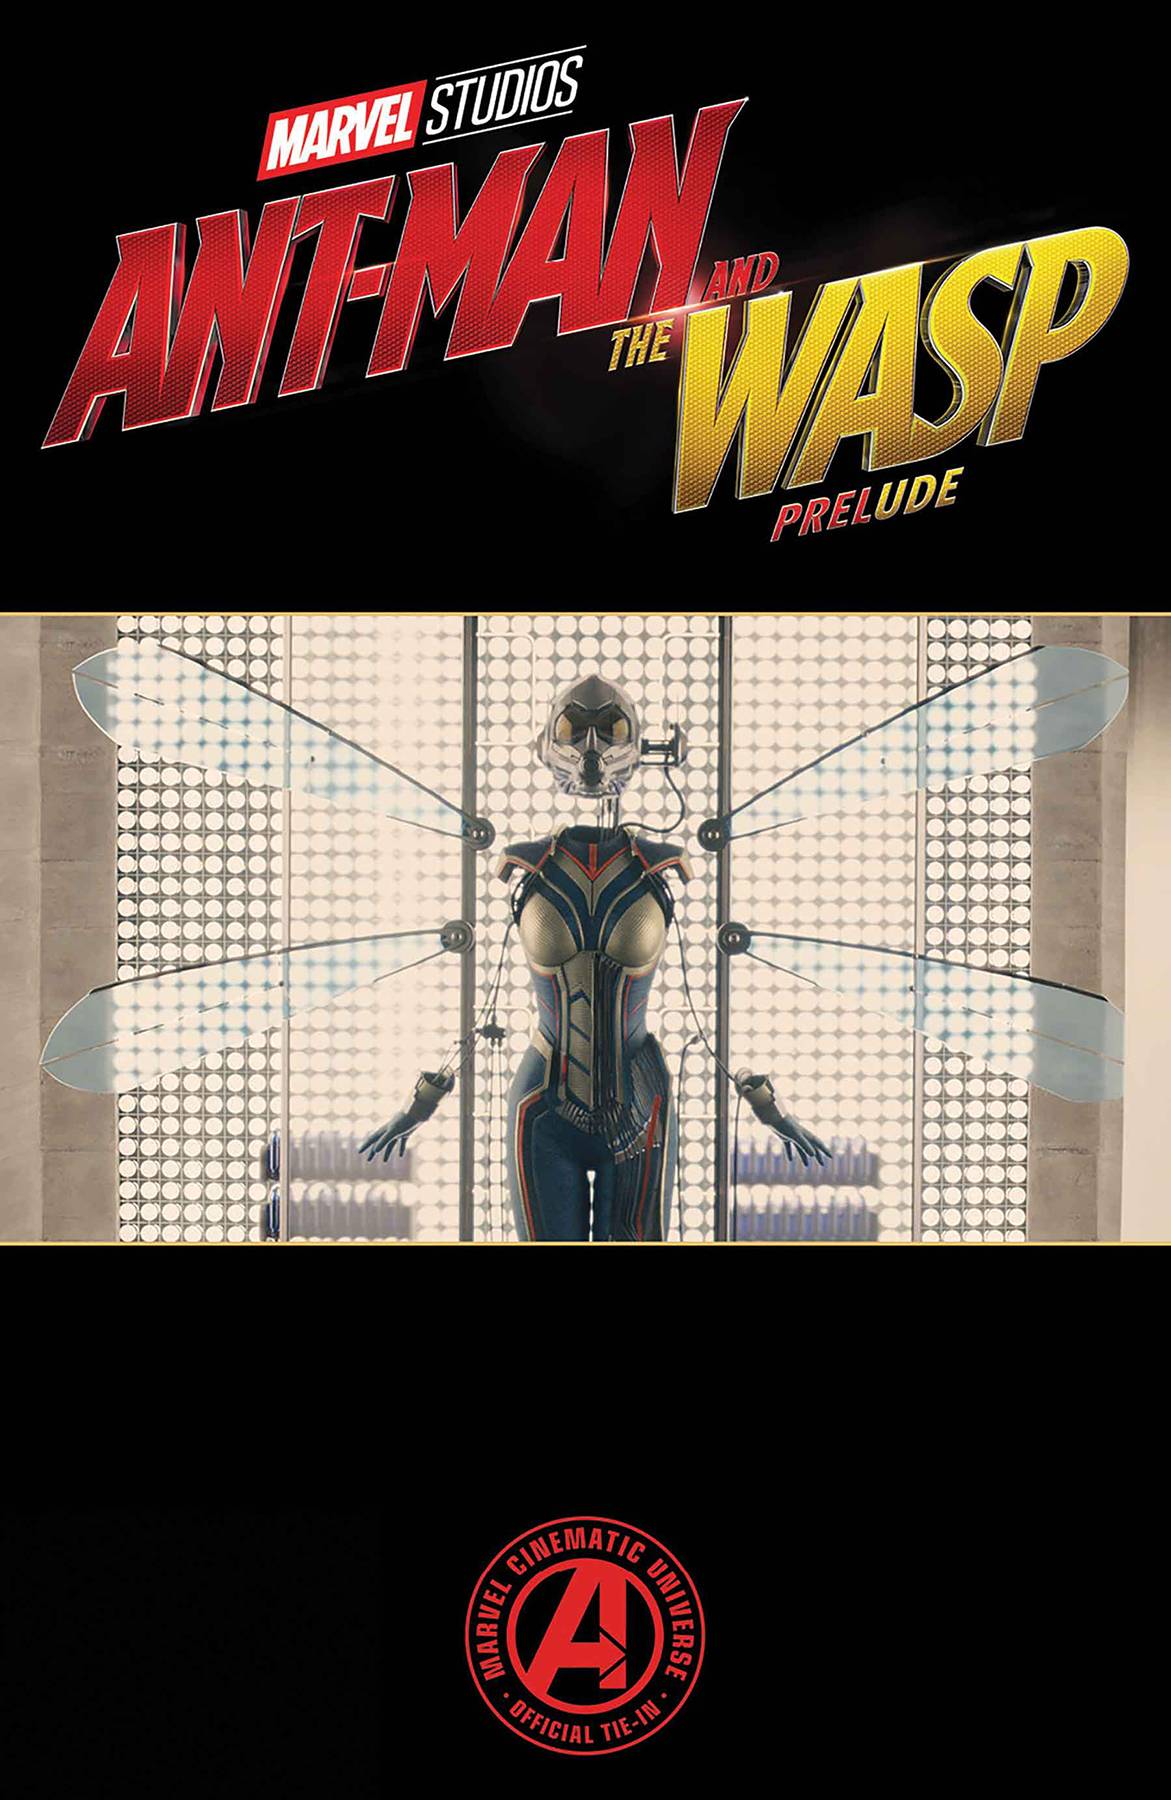 Marvels Ant-Man And Wasp Prelude #2 (Of 2)